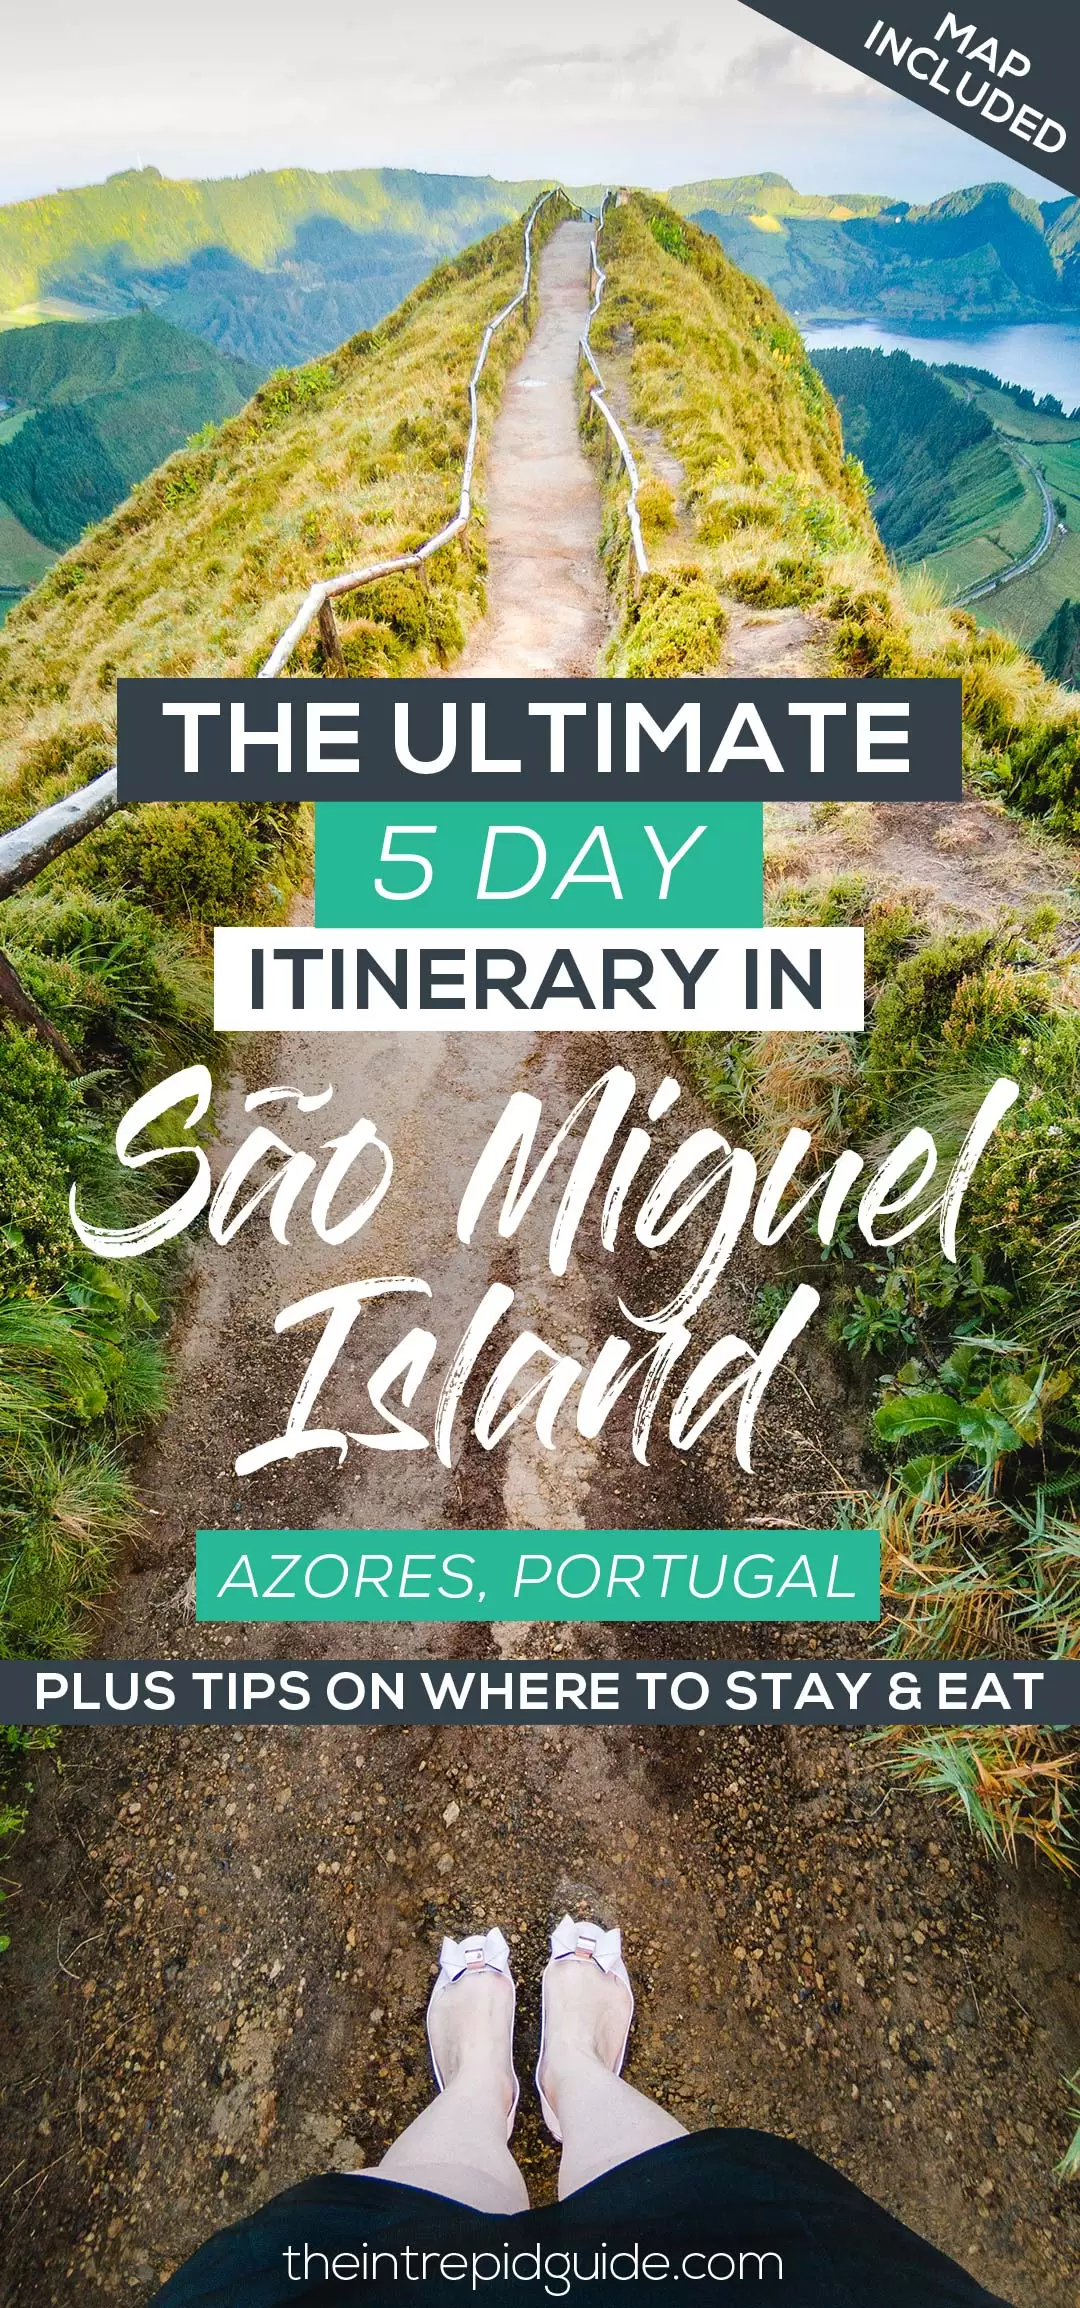 Top Things to do in San Miguel Island, Portugal - 5 Day itinerary